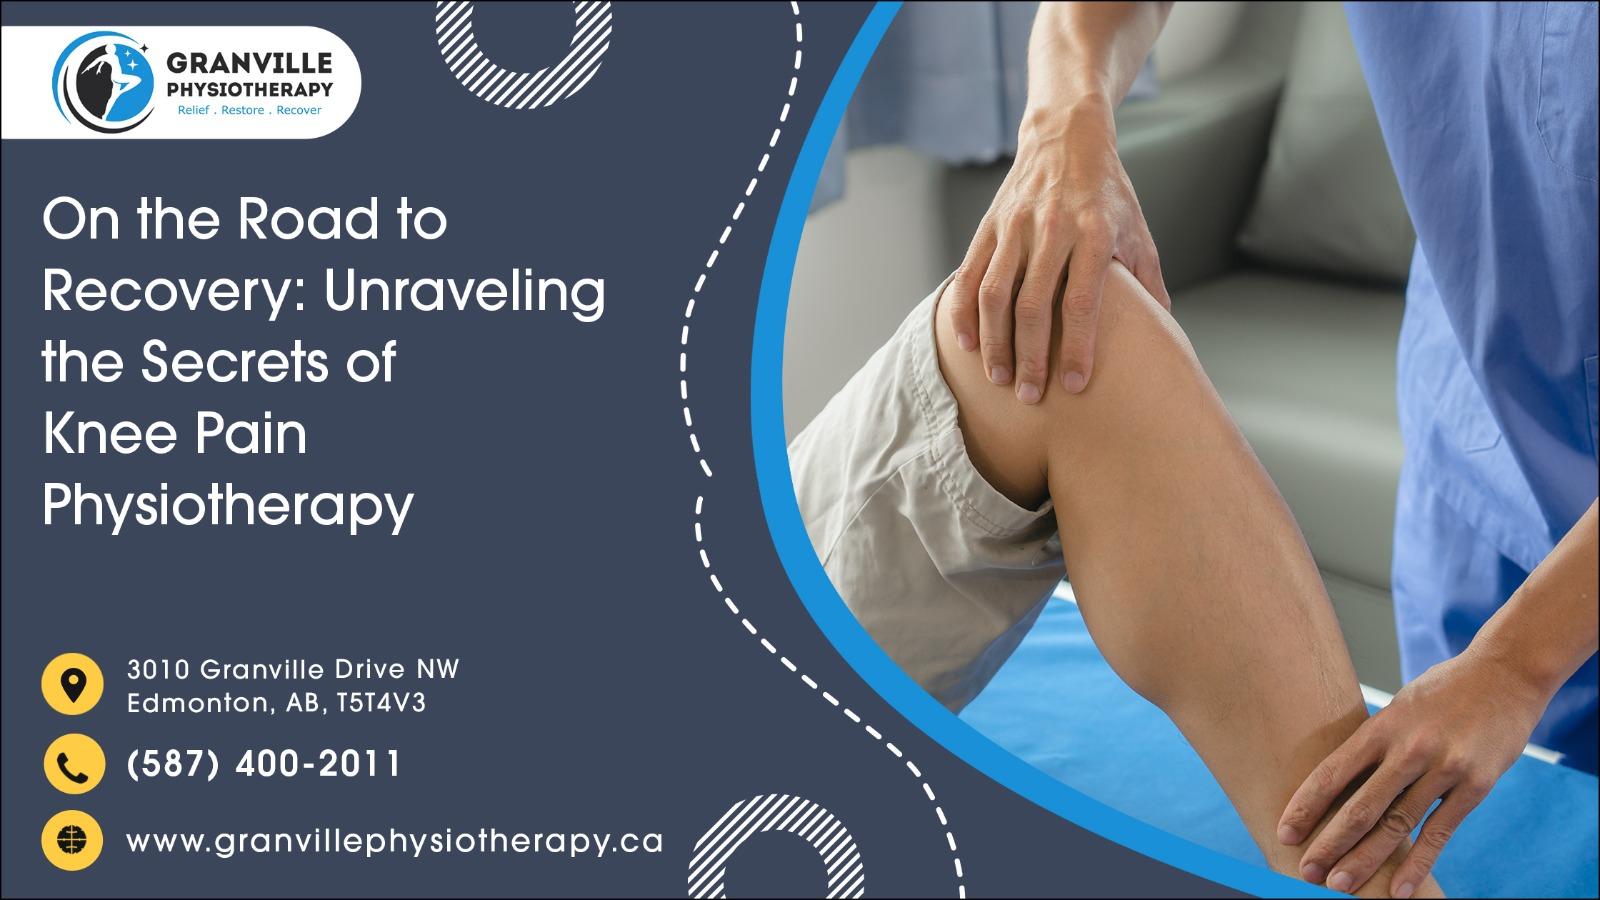 On the Road to Recovery Unraveling the Secrets of Knee Pain Physiotherapy